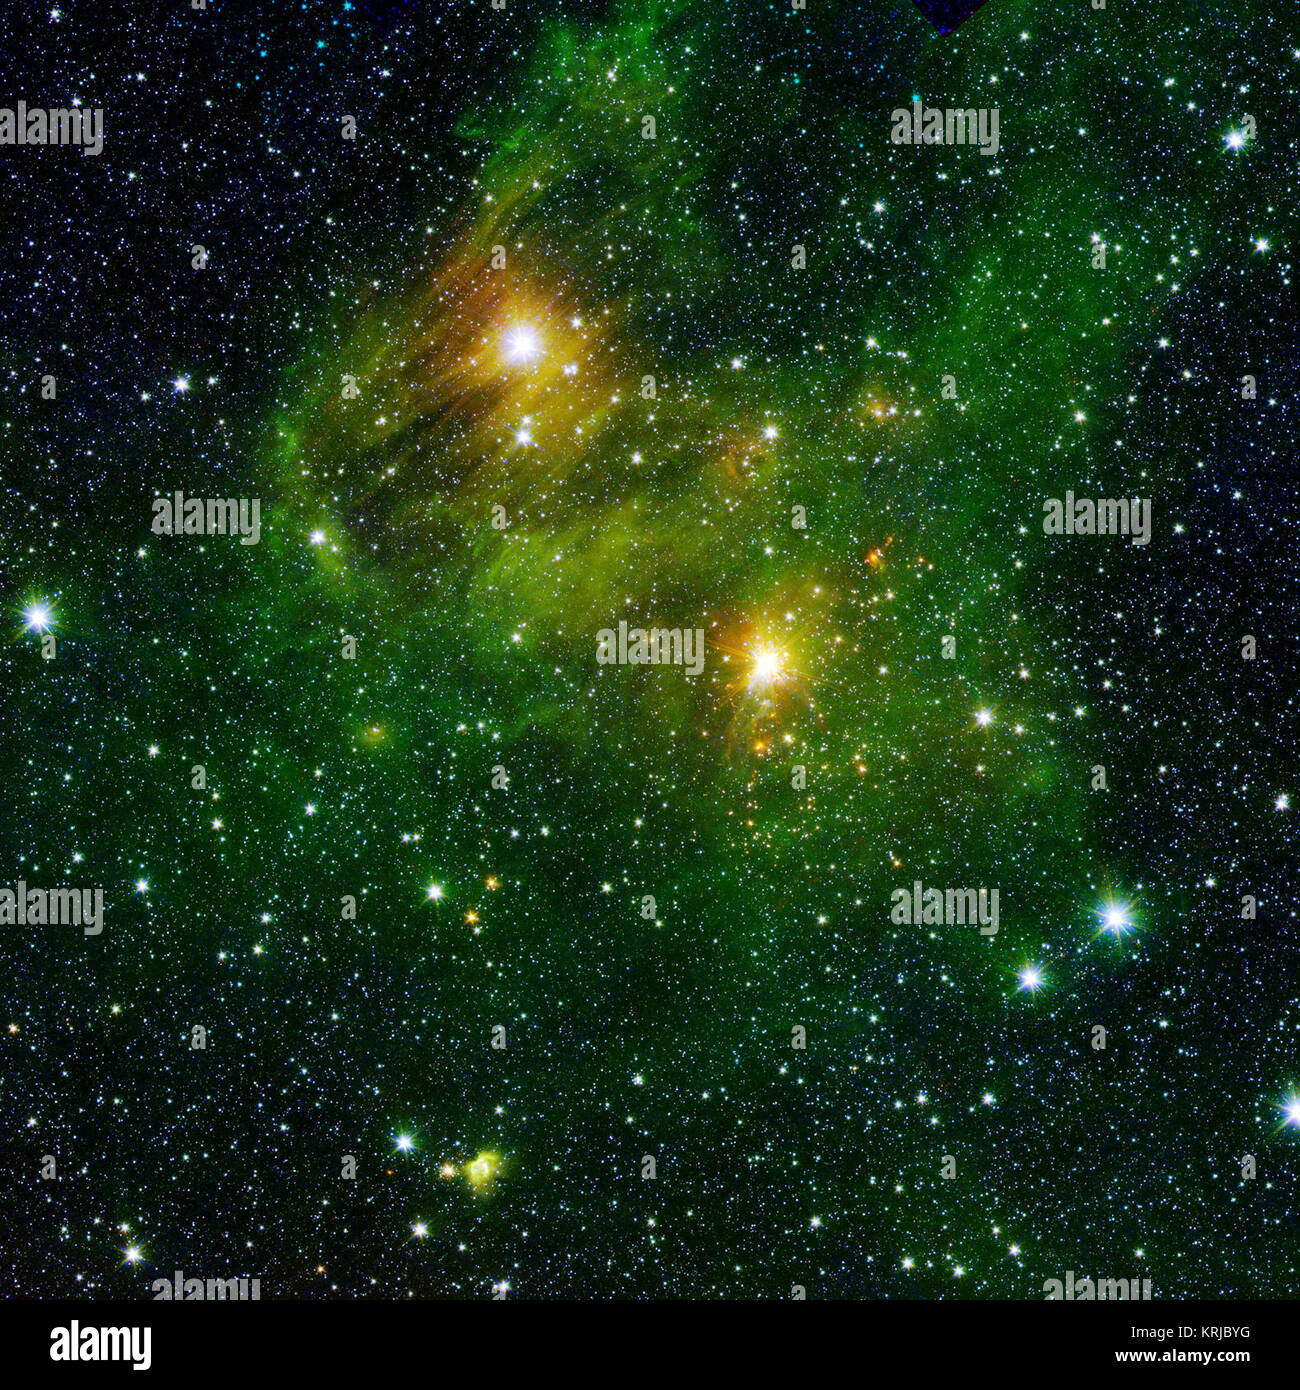 Two extremely bright stars illuminate a greenish mist in this and other images from the new GLIMPSE360 survey. This fog is comprised of hydrogen and carbon compounds called polycyclic aromatic hydrocarbons (PAHs), which are found right here on Earth in sooty vehicle exhaust and on charred grills. In space, PAHs form in the dark clouds that give rise to stars. These molecules provide astronomers a way to visualize the peripheries of gas clouds and study their structures in great detail. PAHs are not actually 'green;' a representative color coding in these images lets scientists observe PAHs glo Stock Photo